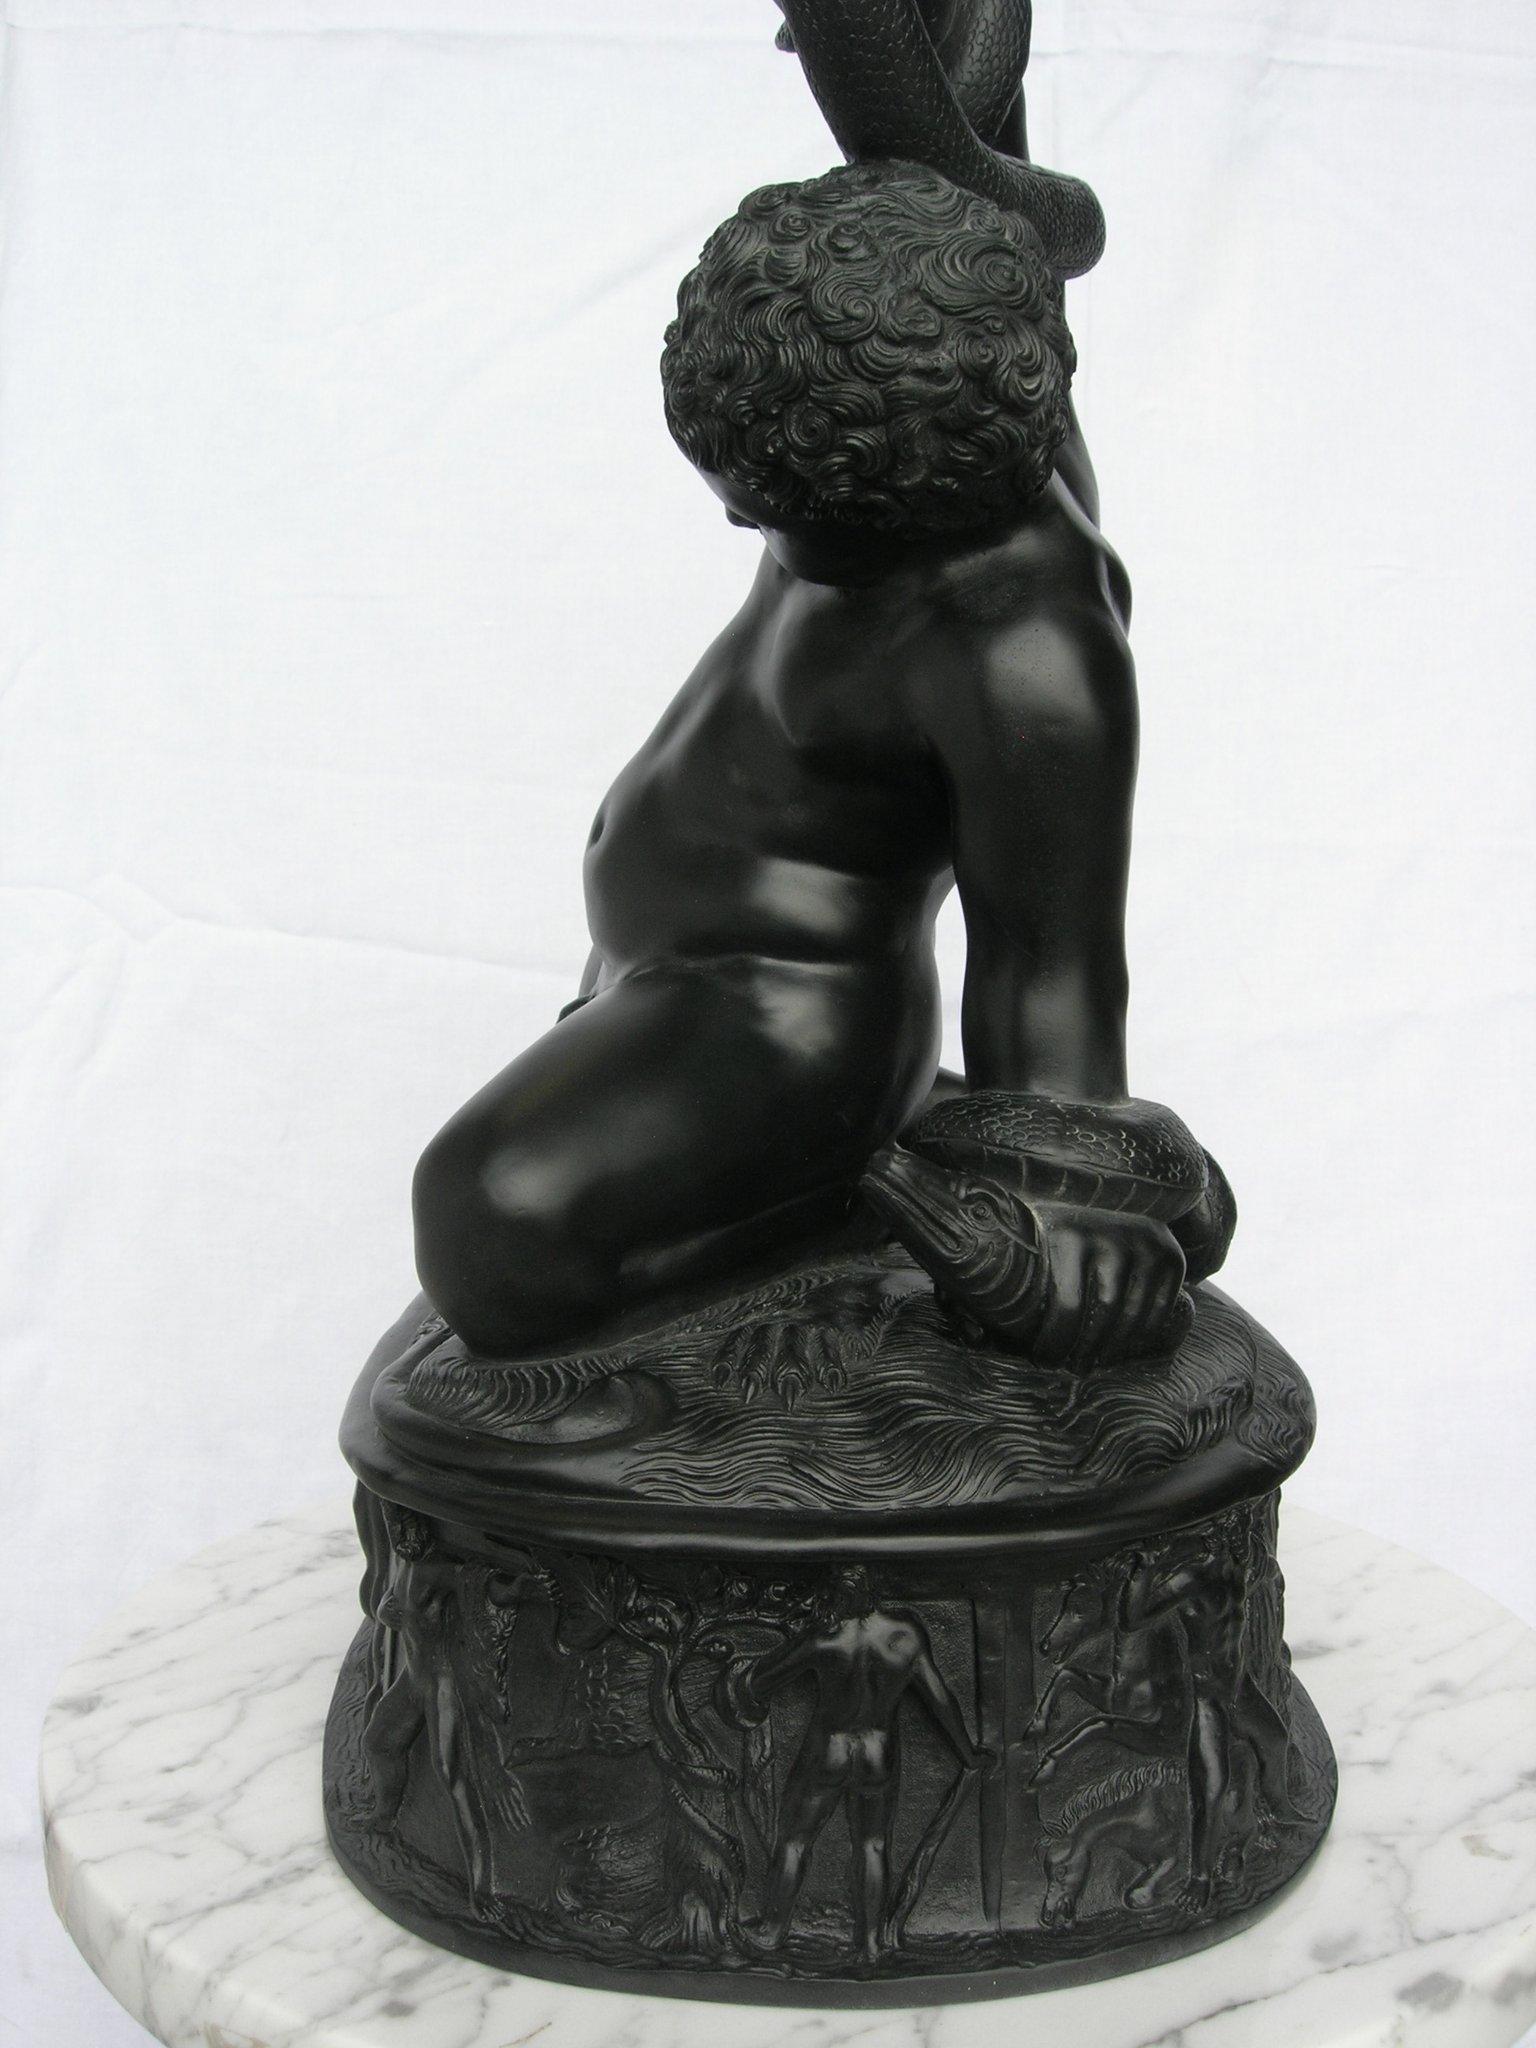 The Young Hercules, Basalt Black Marble Sculpture, 20th Century For Sale 1